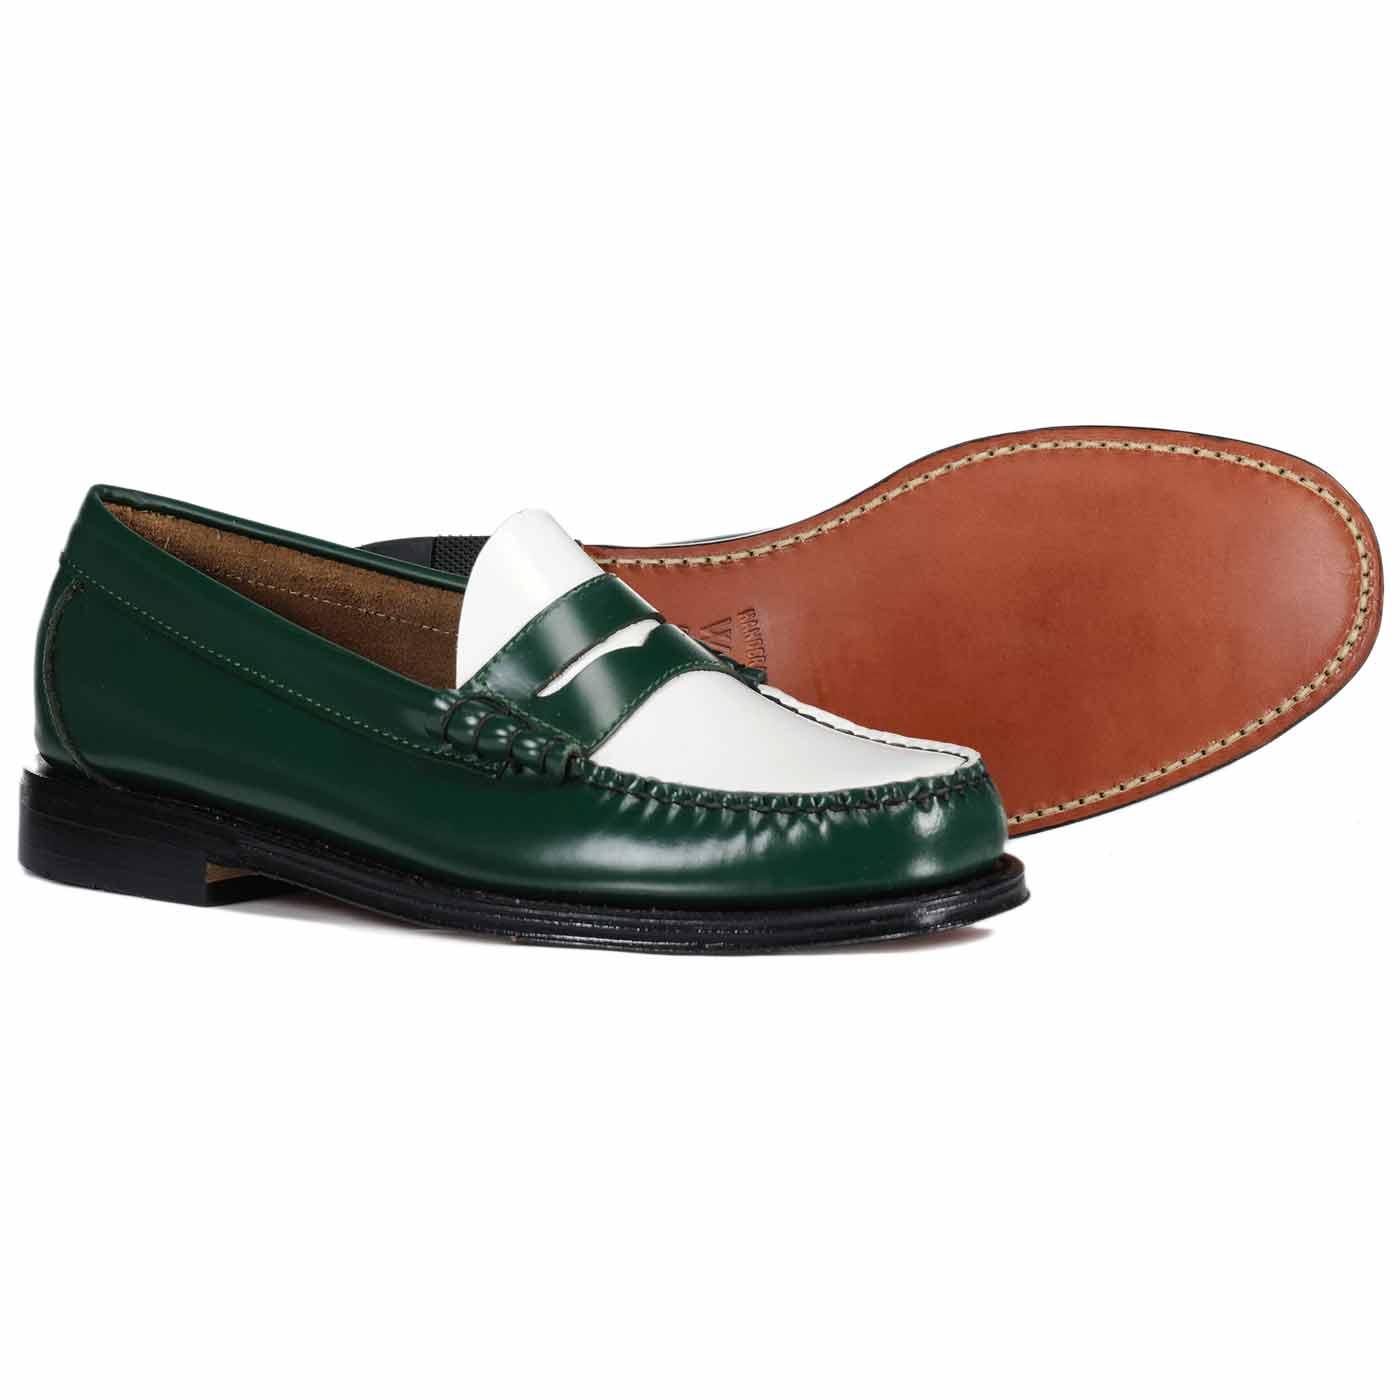 BASS WEEJUNS Larson Retro Mod Penny Loafers Green/White